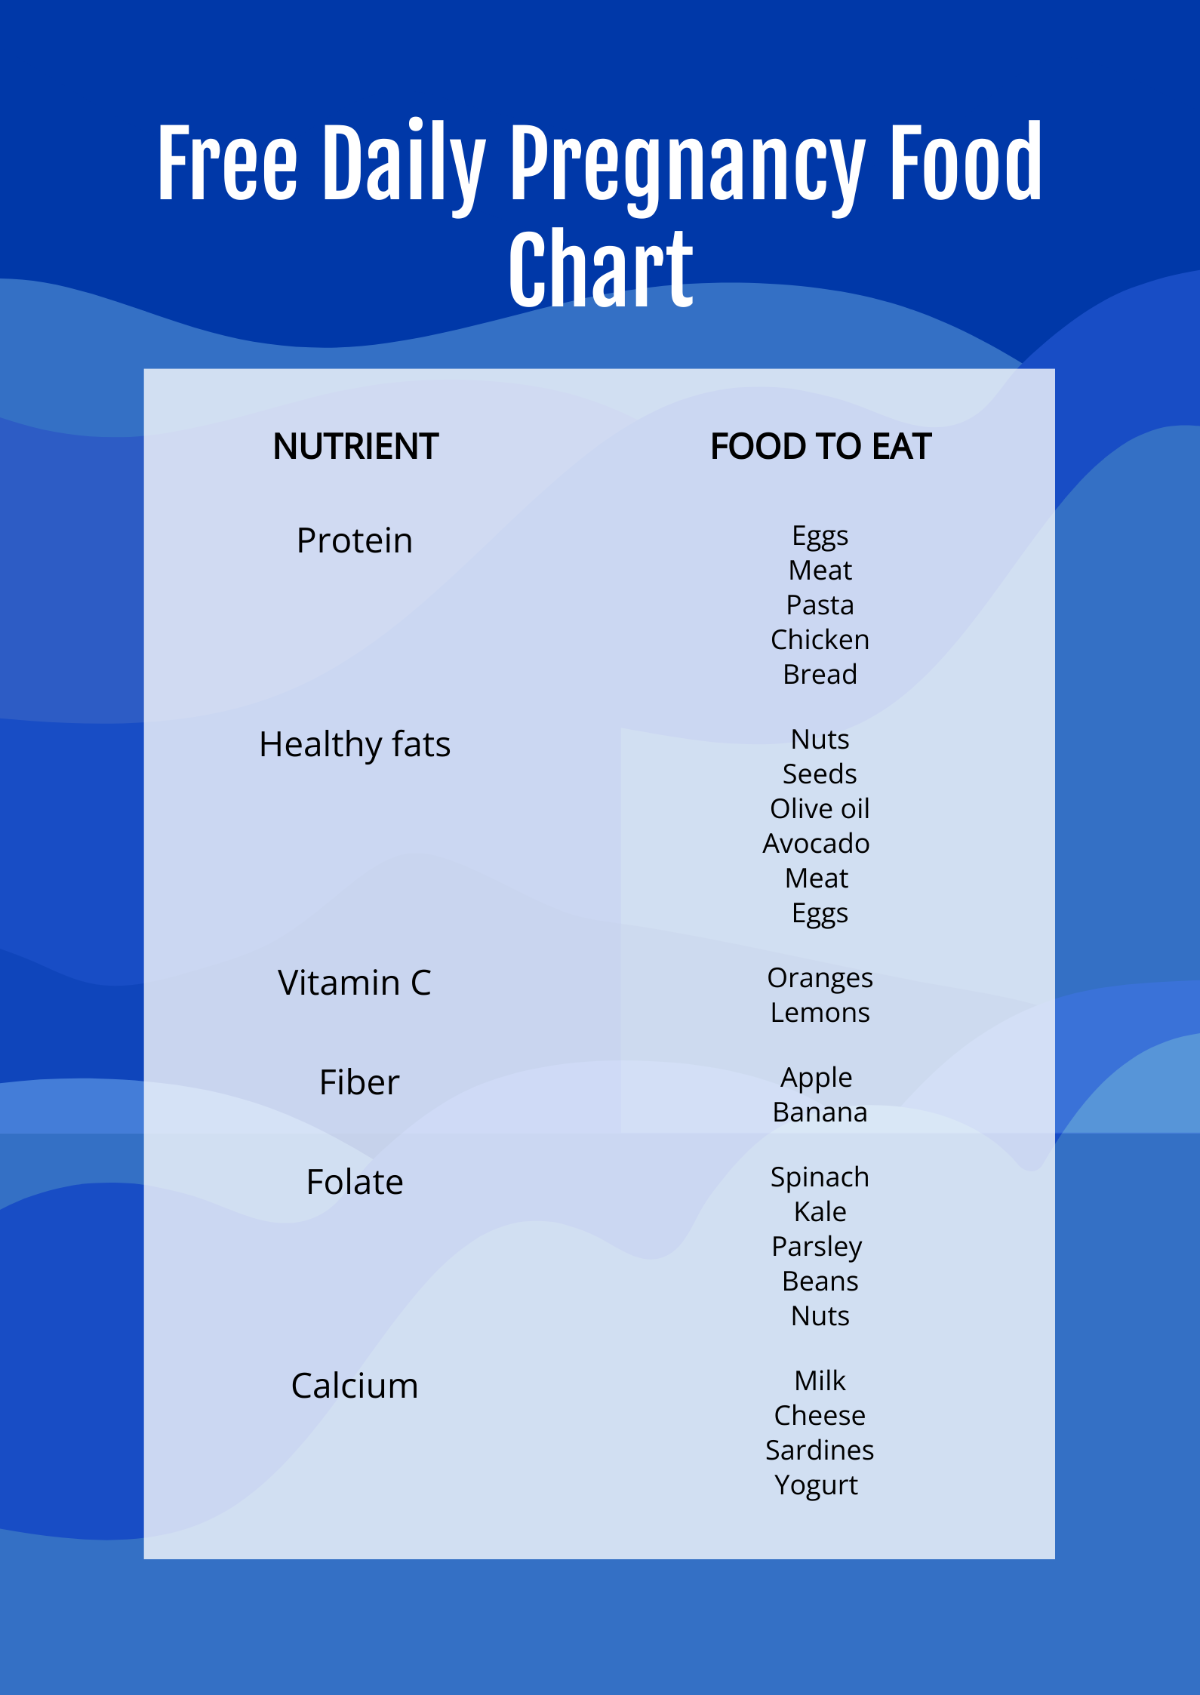 Free Daily Pregnancy Food Chart Template